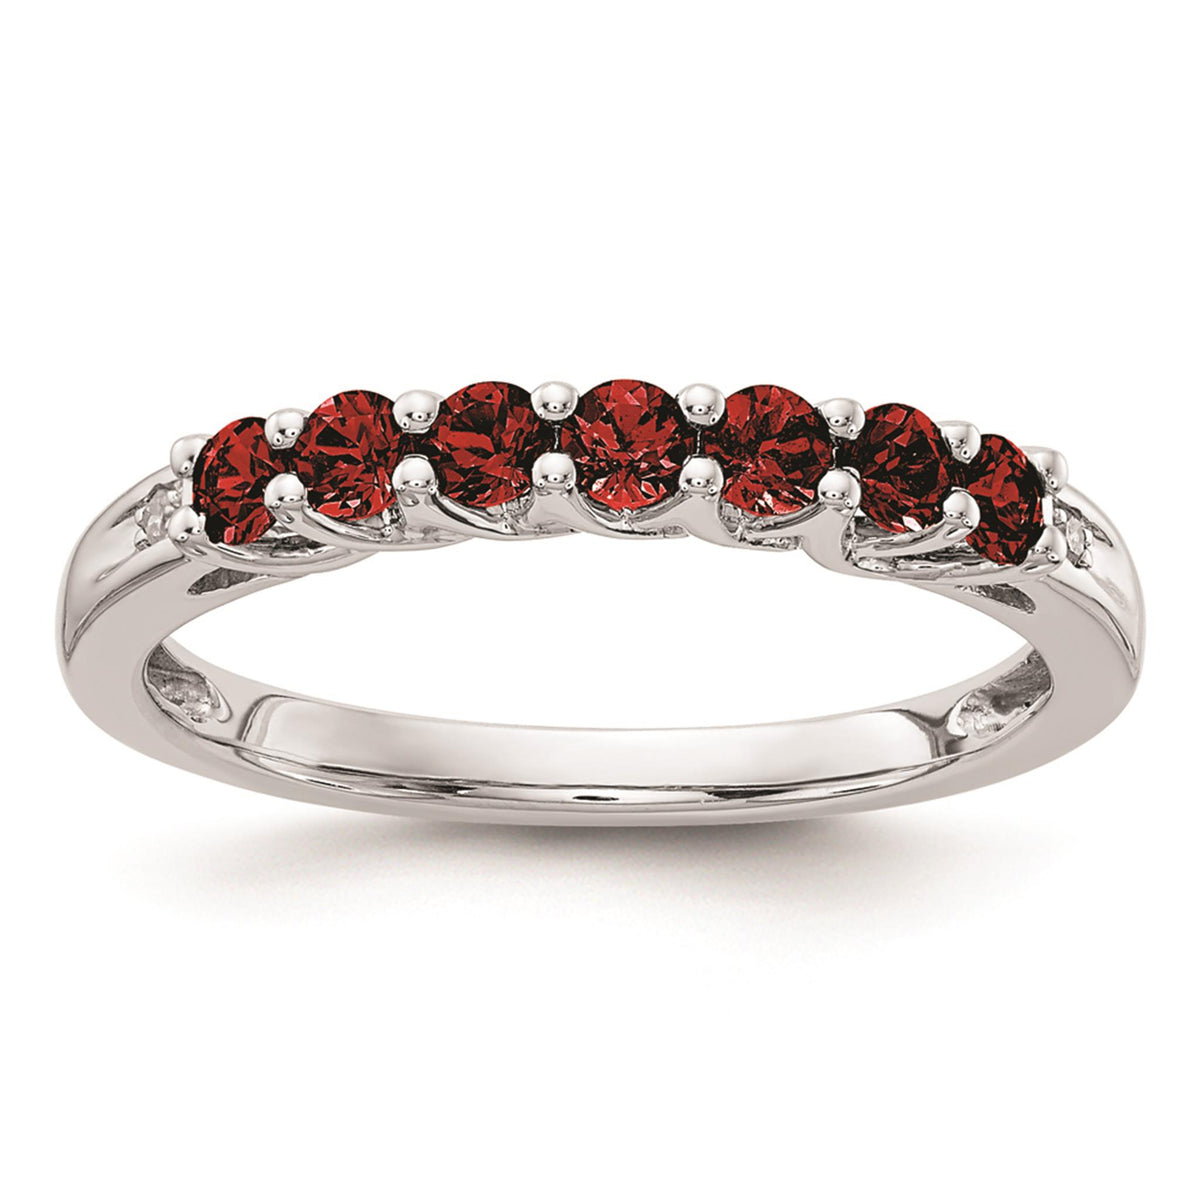 10Kt White Gold Stackable Ring With 2.5mm Garnets